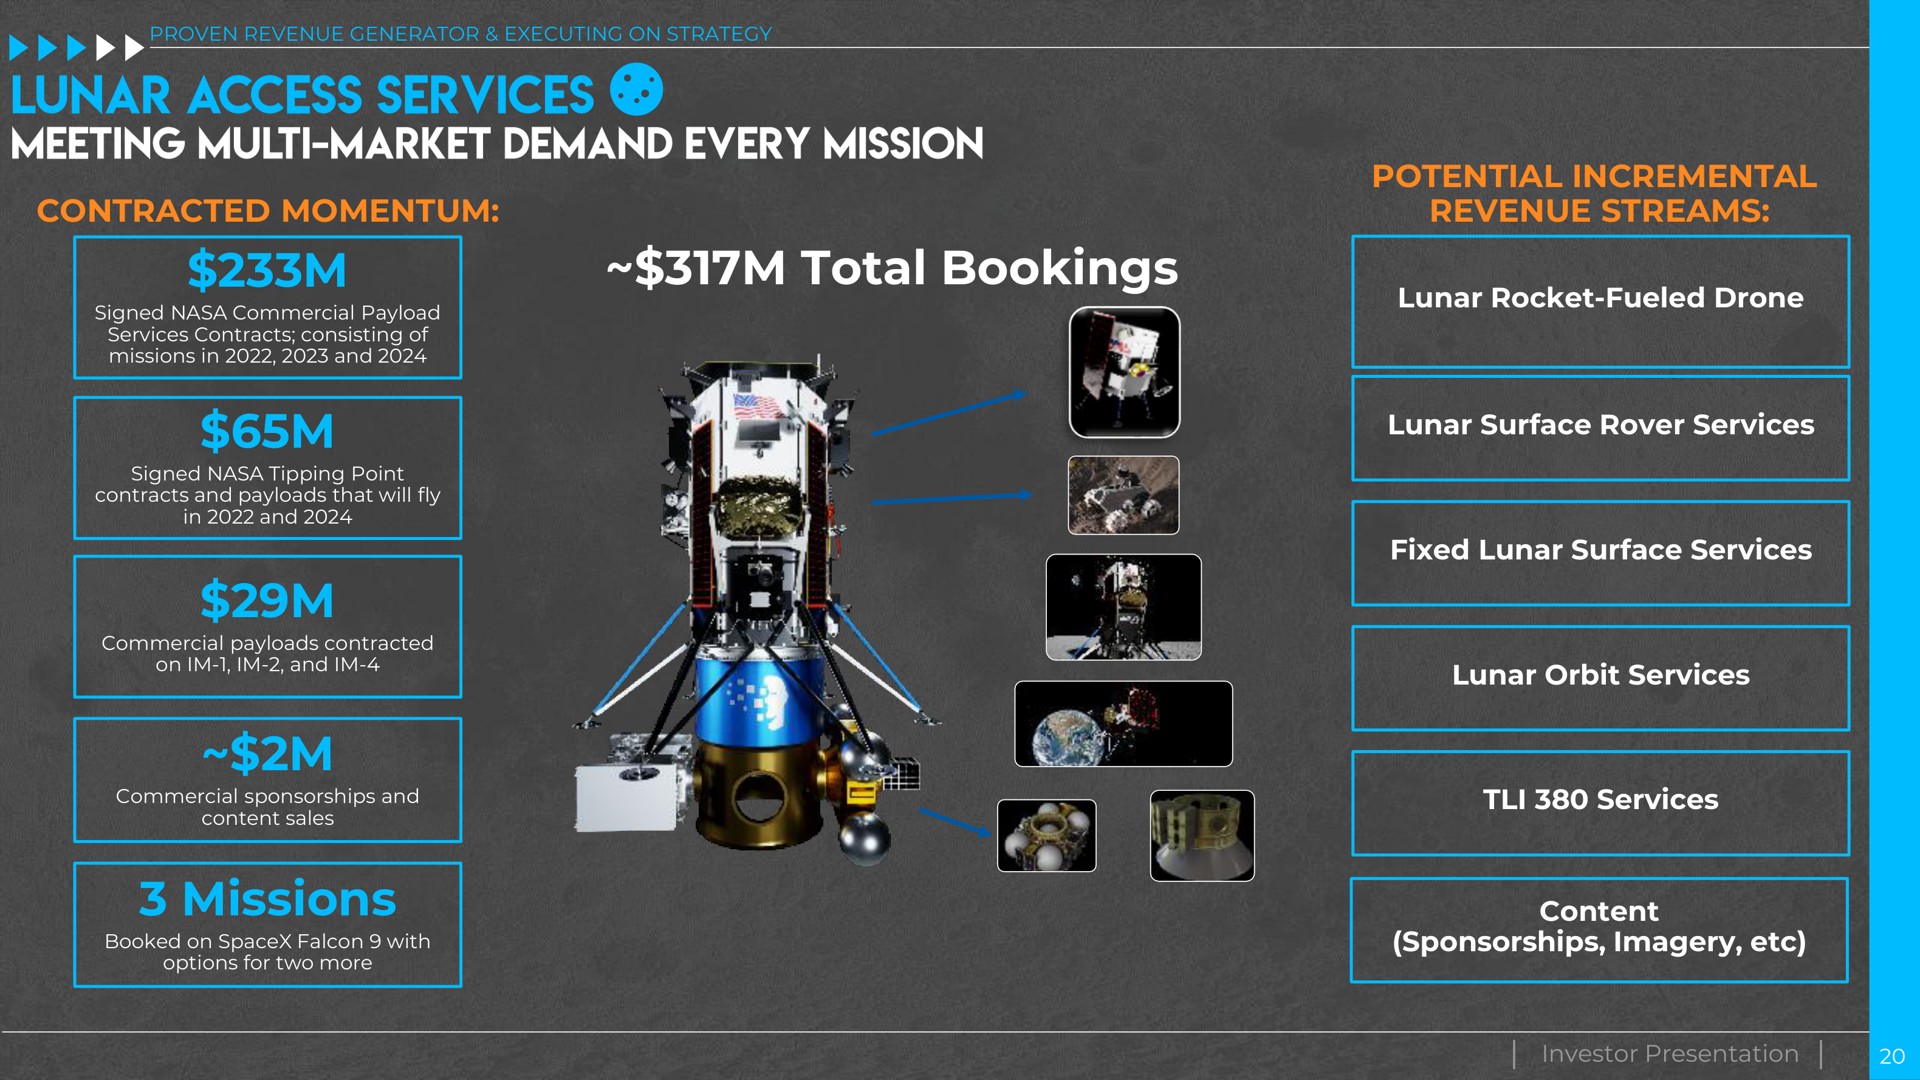 total bookings contracted momentum missions potential incremental revenue streams lunar rocket fueled drone lunar surface rover services fixed lunar surface services lunar orbit services services content sponsorships imagery investor presentation access meeting market demand every mission | Intuitive Machines